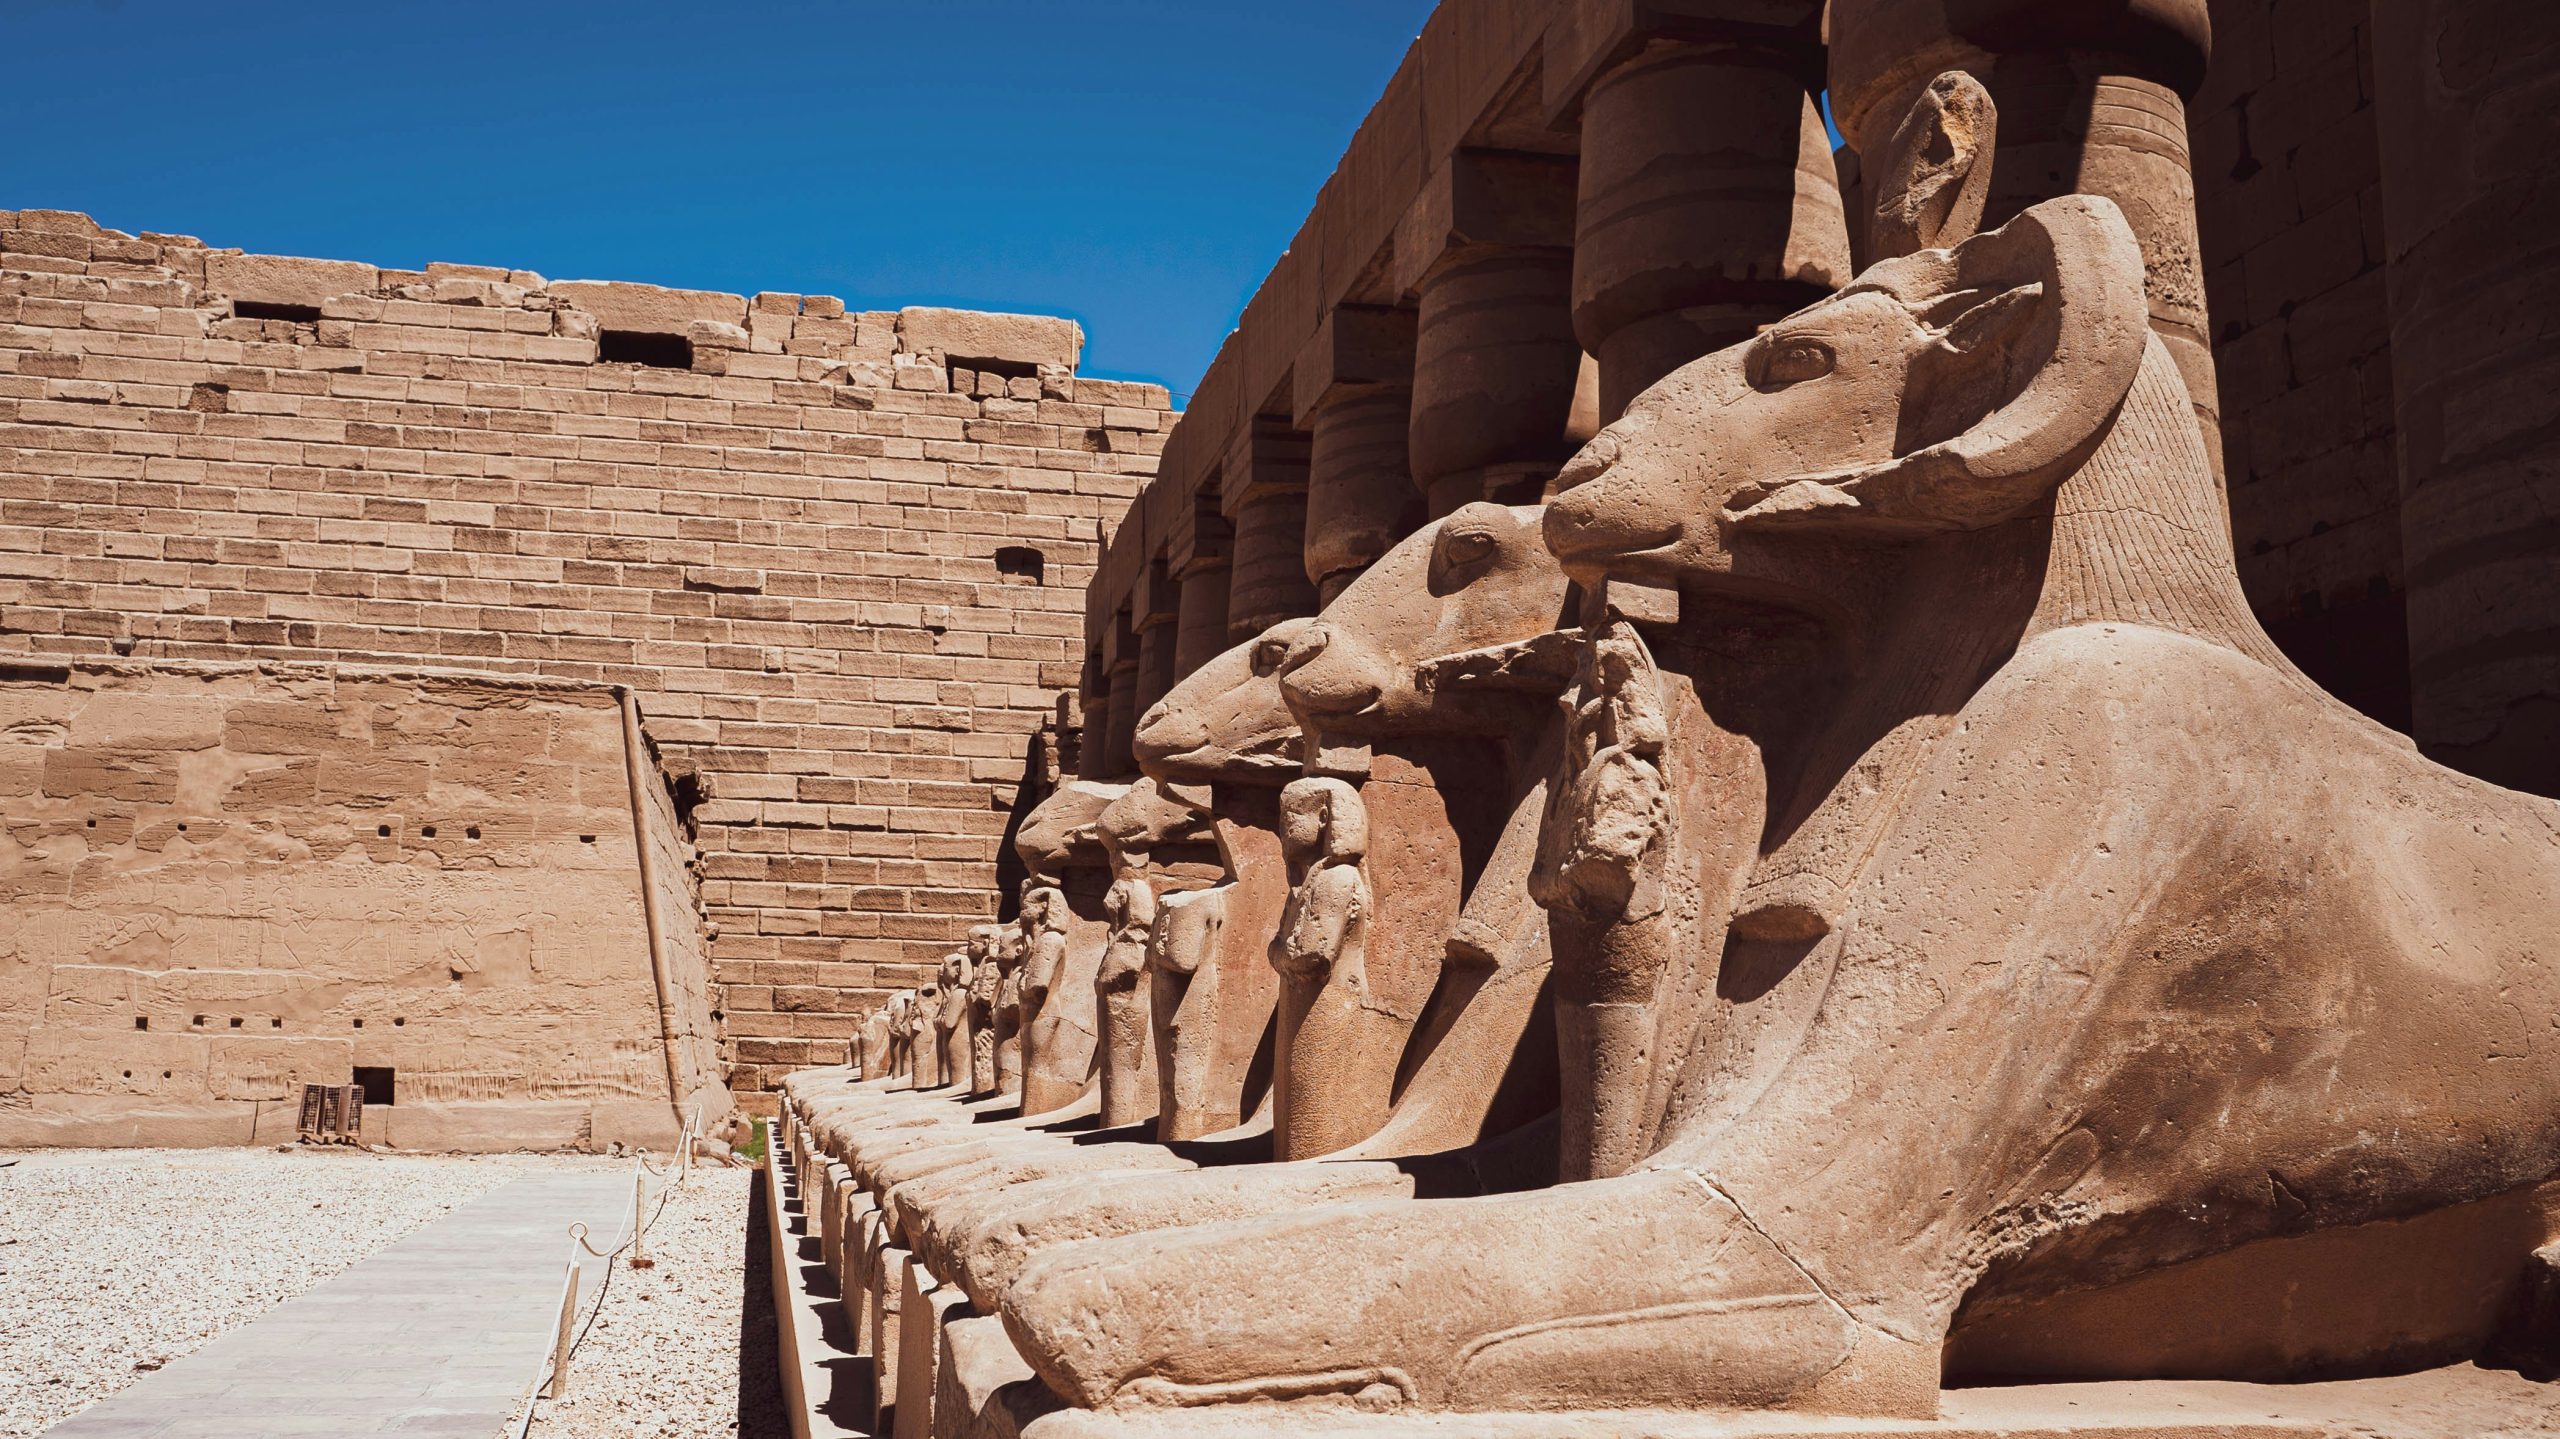 discover the ancient wonders of luxor temples and their breathtaking architecture in the heart of egypt.